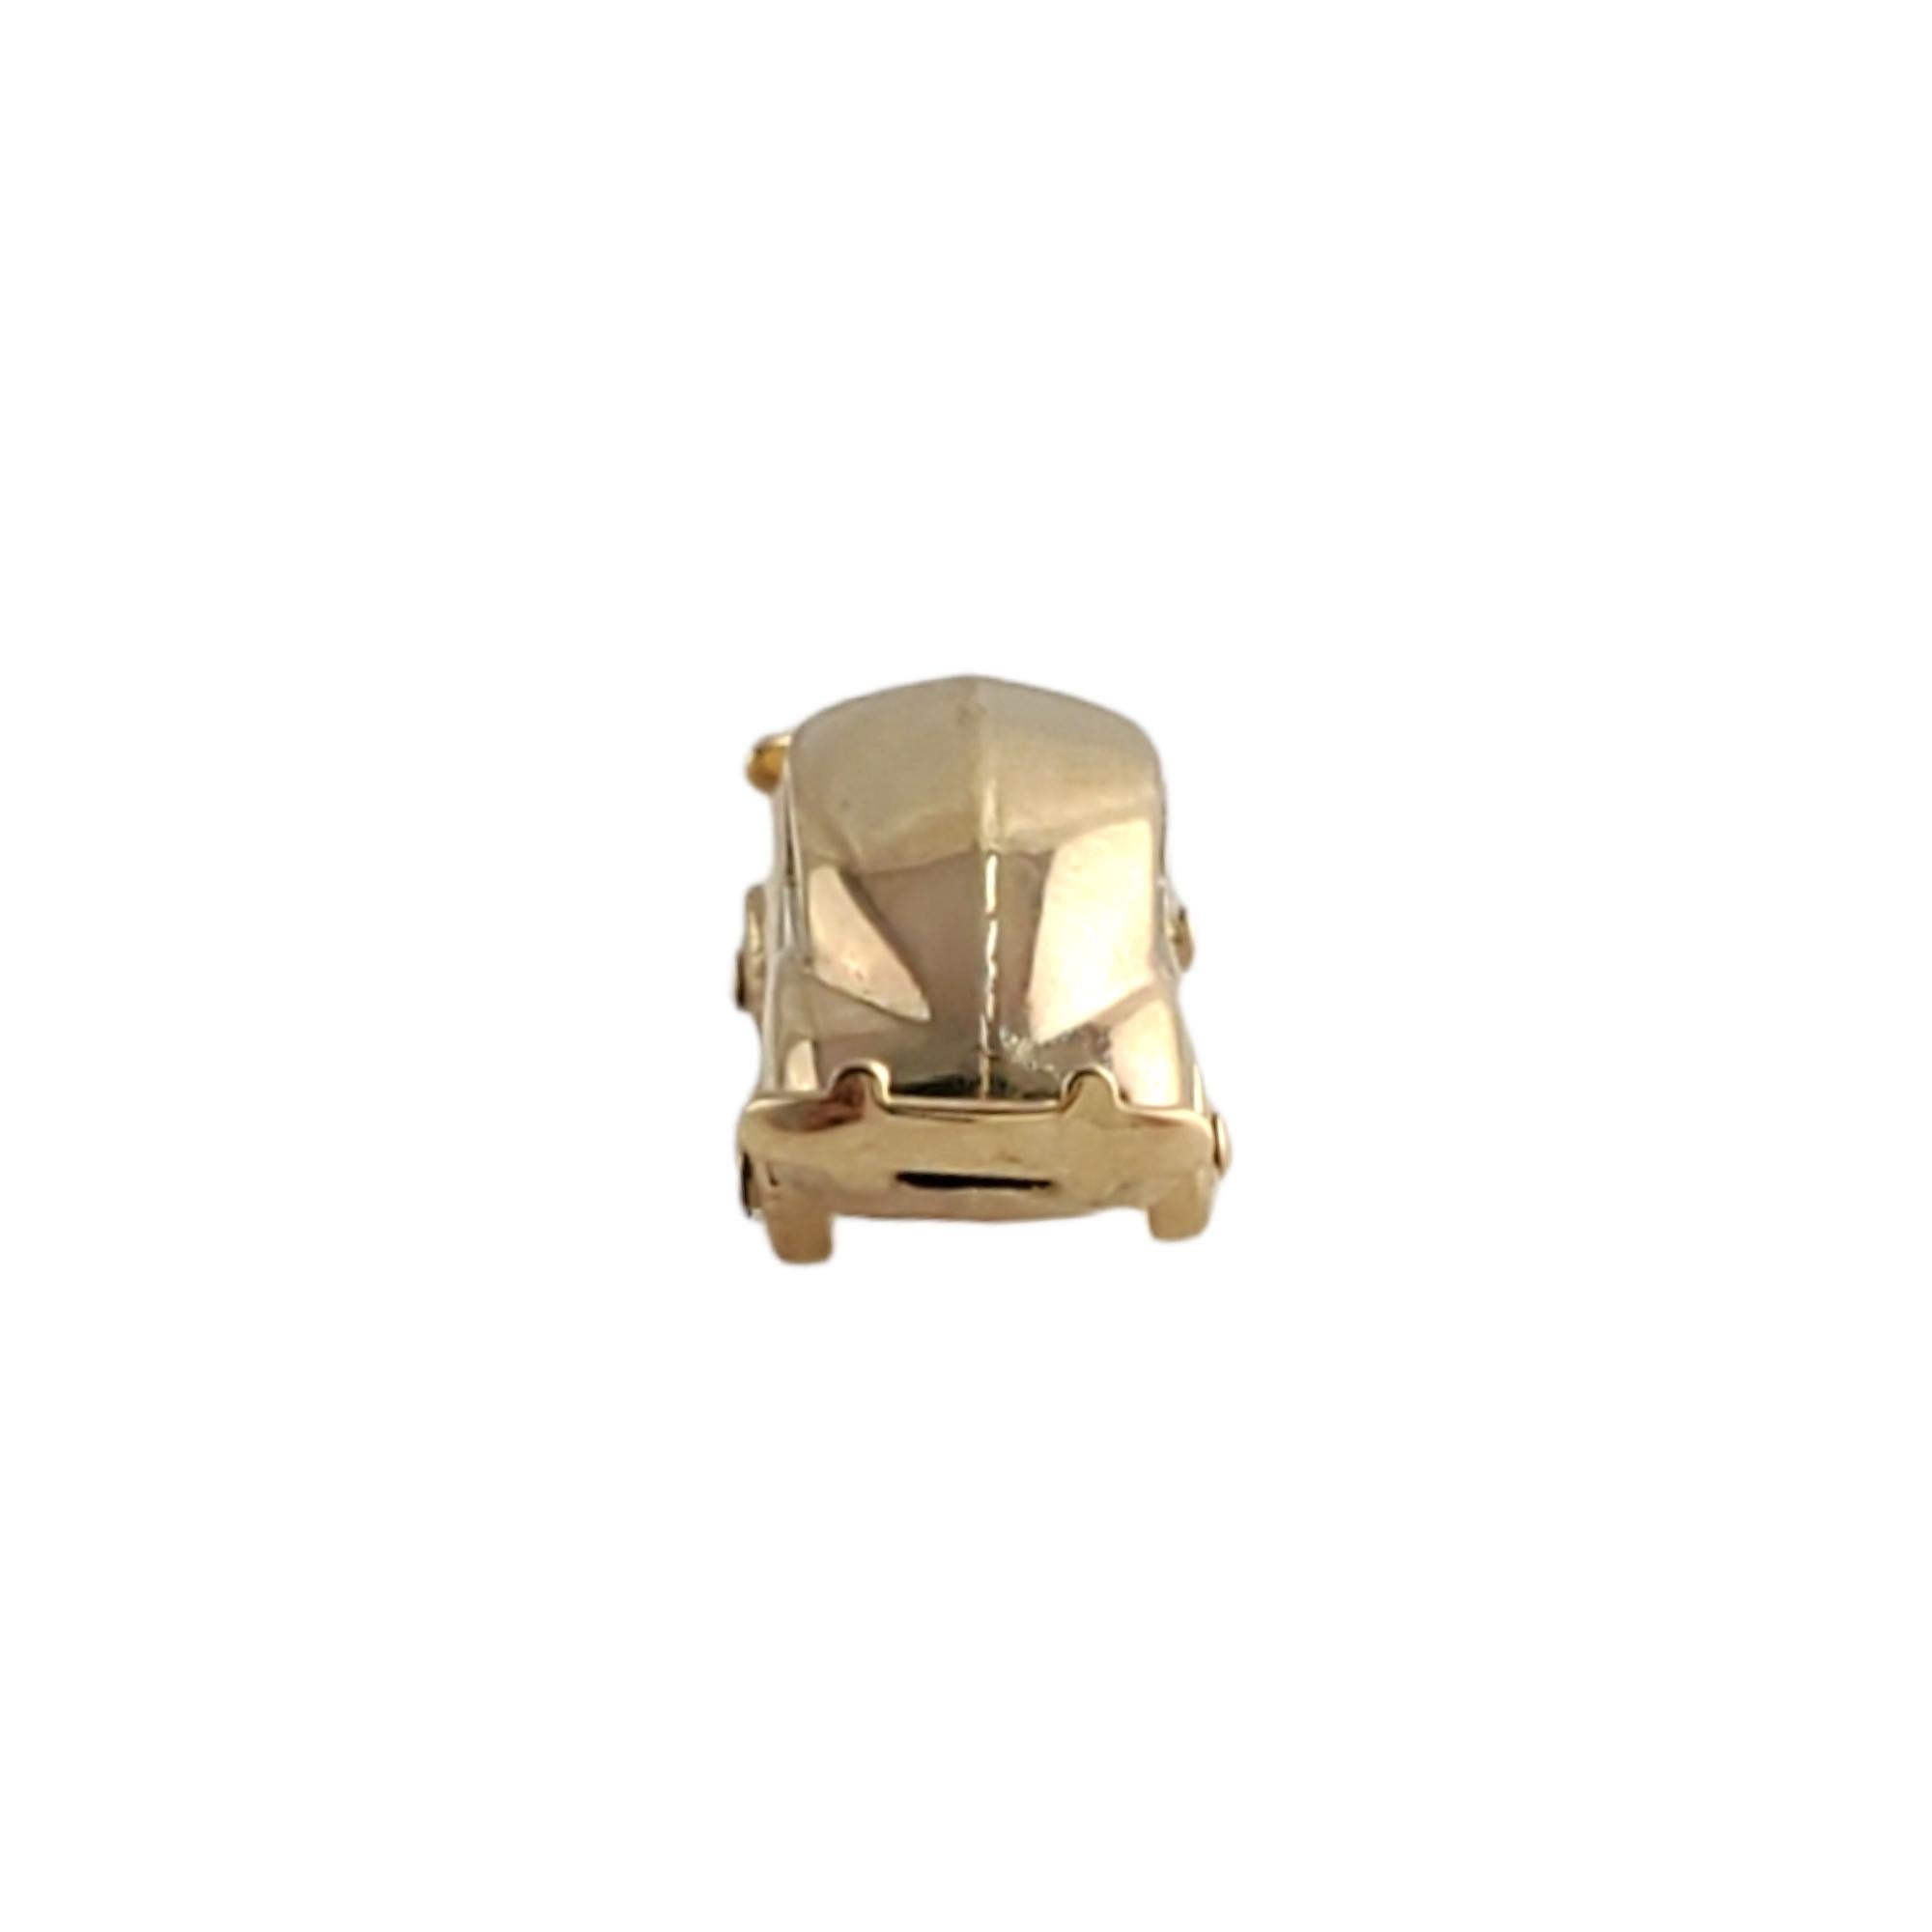 14K Yellow Gold Volkswagen Bug Car Charm 

This adorable yellow gold Volkswagen car charm will drive its way into your heart! 

Size: 7.77mm X 22.48mm

Weight:  2.3gr / 1.4 dwt

Hallmark: 14K 

Very good condition, professionally polished.

Will